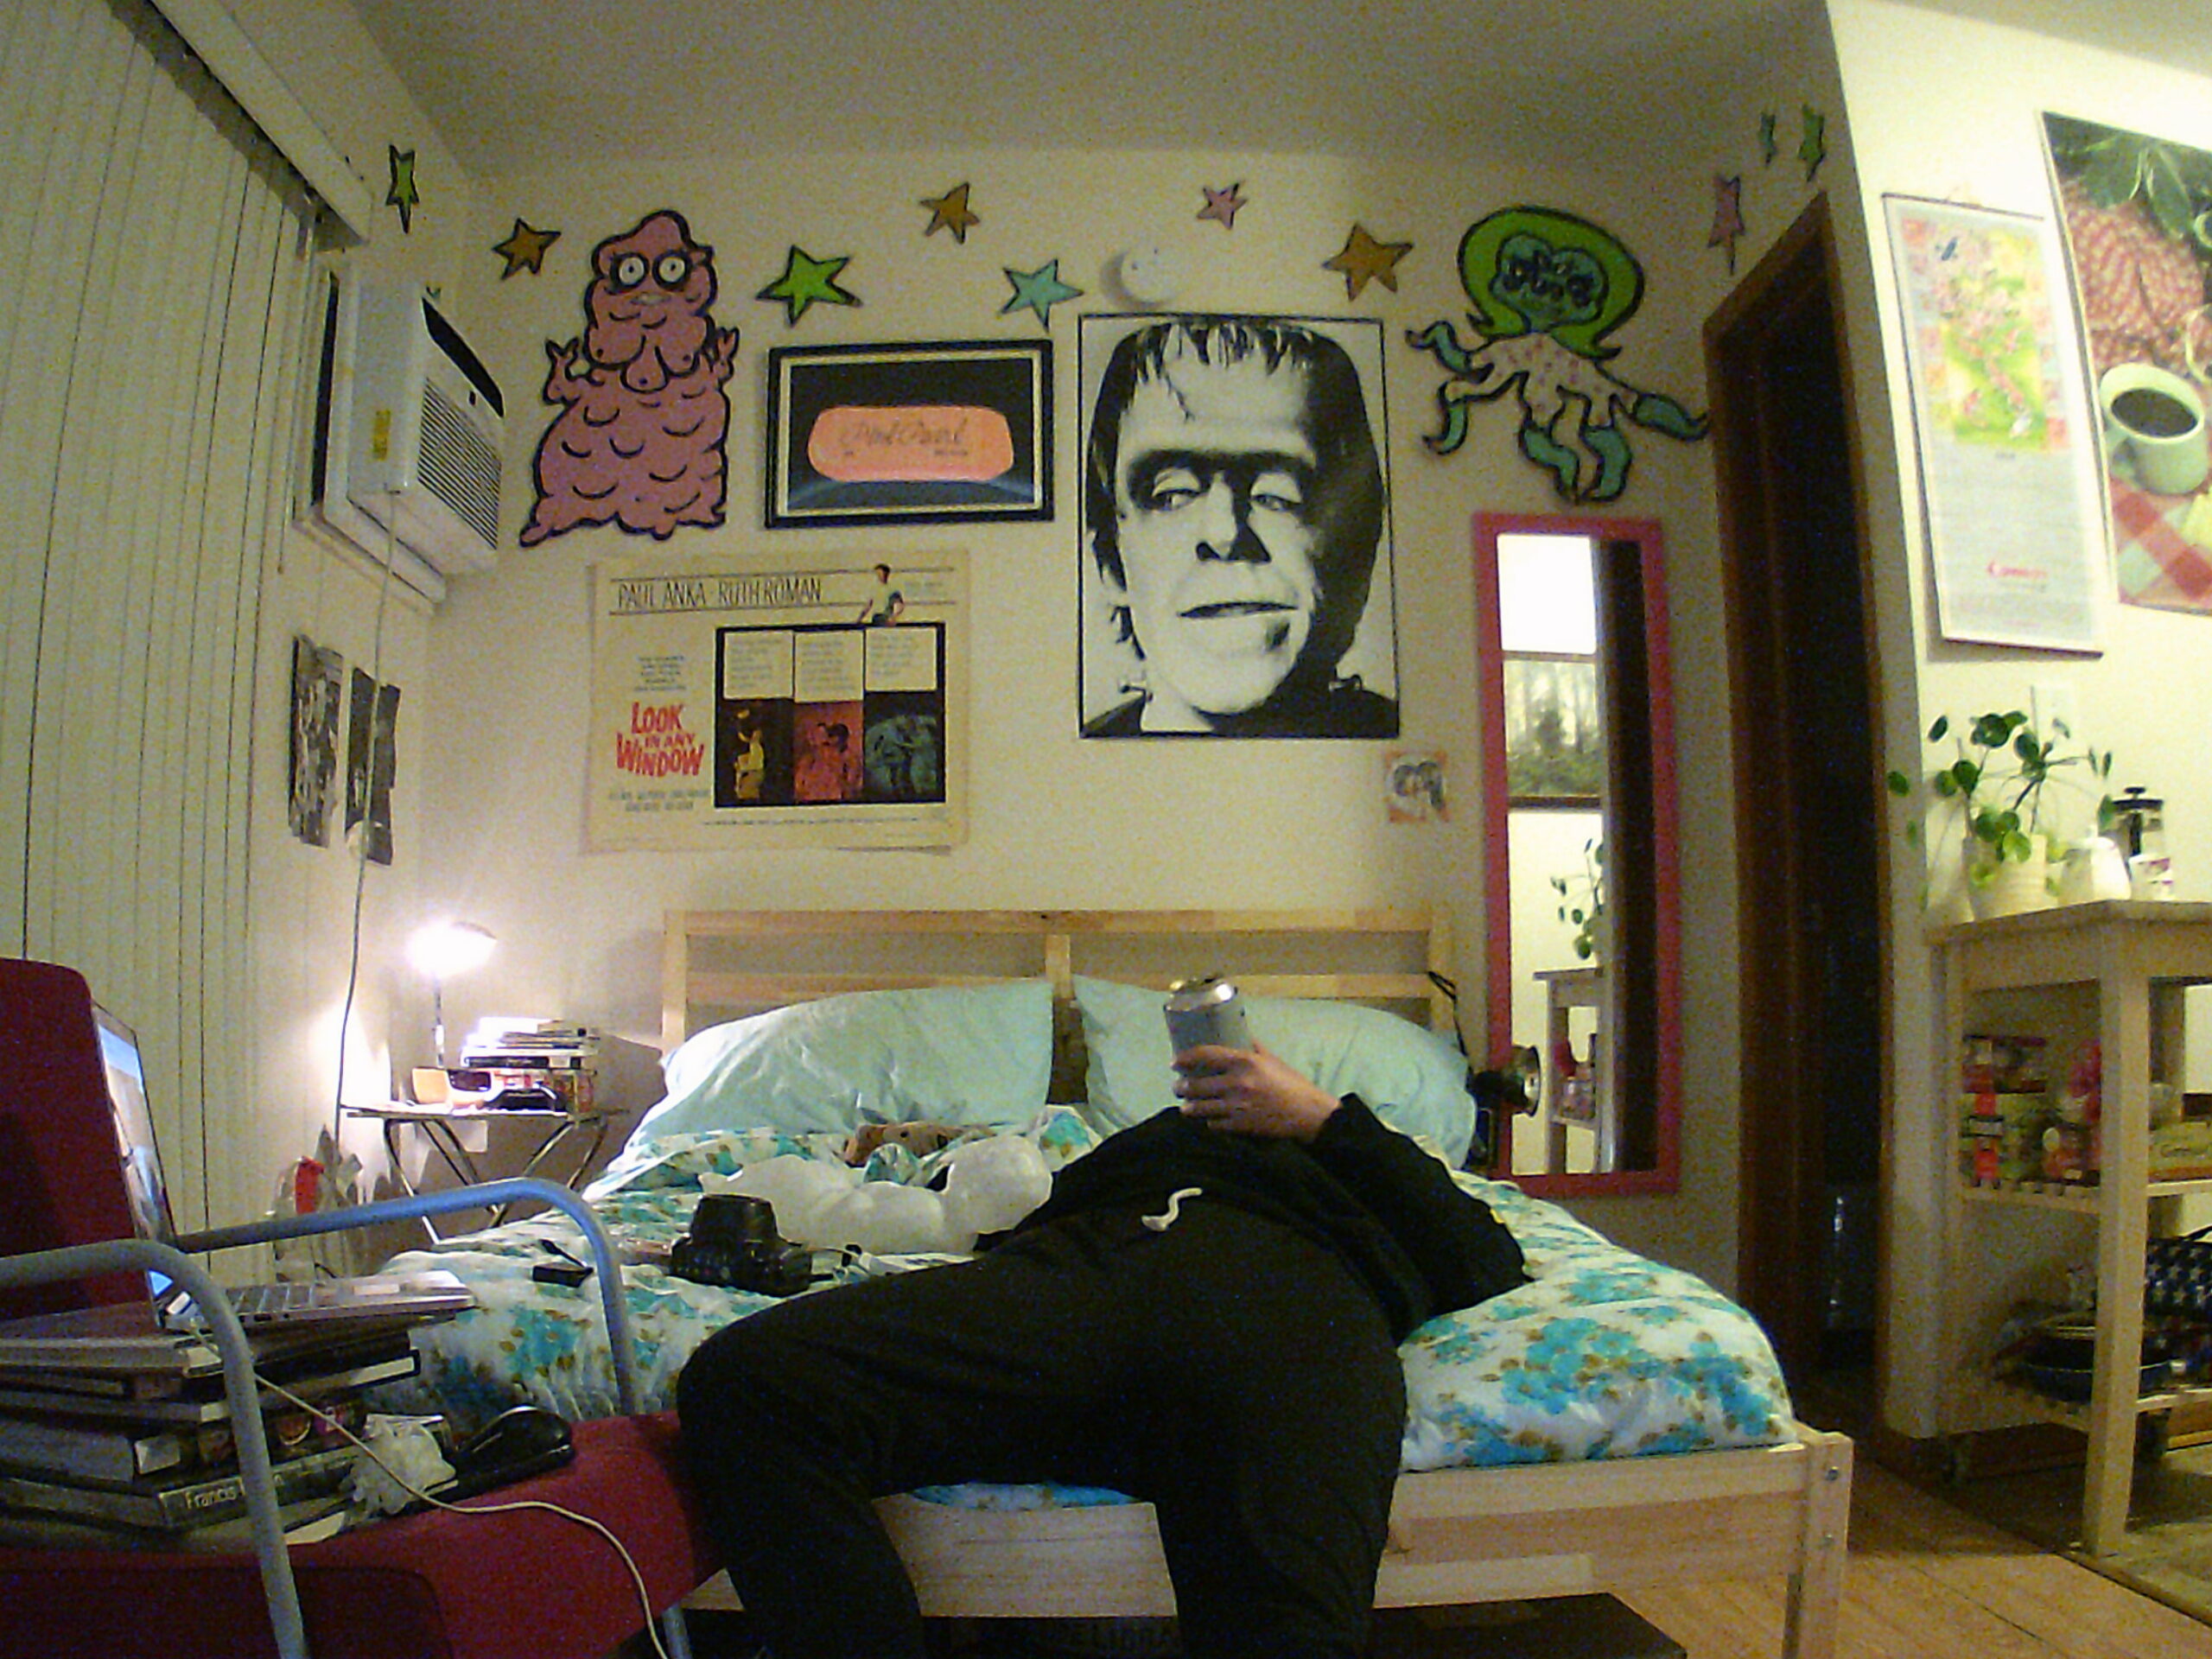 Person laying back on bed in bedroom with cartoons and art on walls